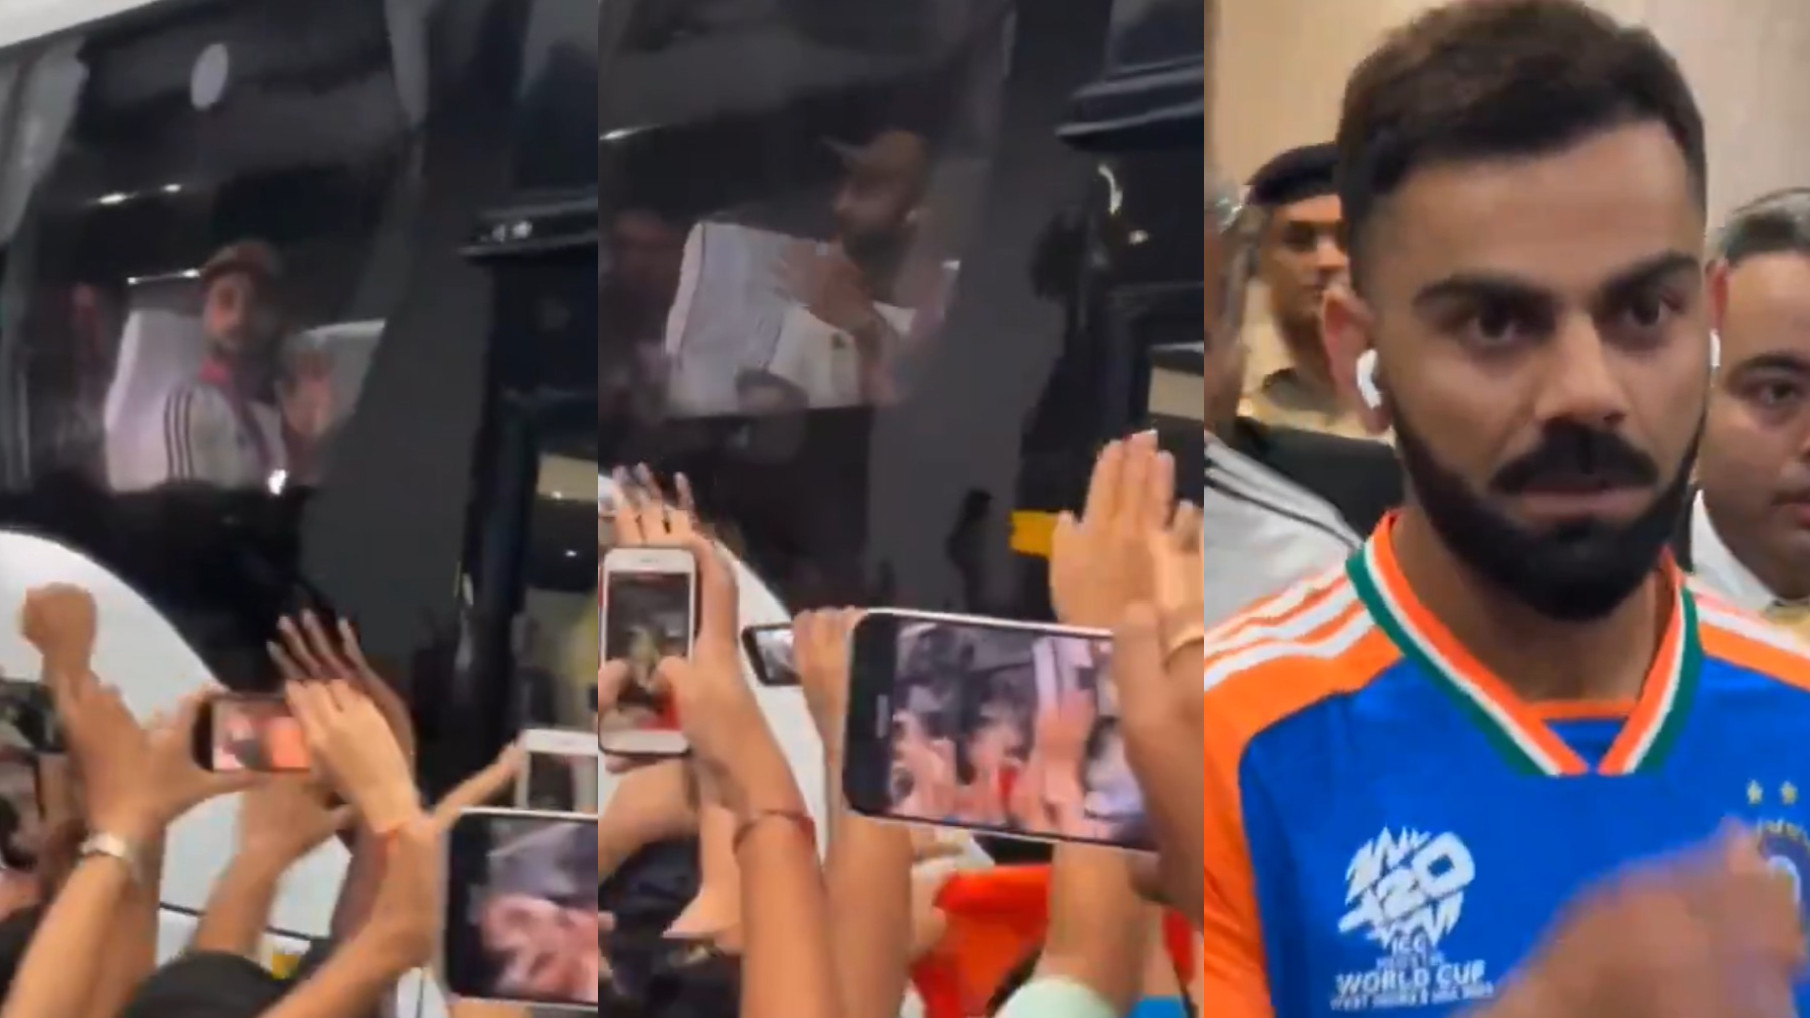 WATCH- Virat Kohli’s reaction to seeing tremendous fan support at Delhi airport